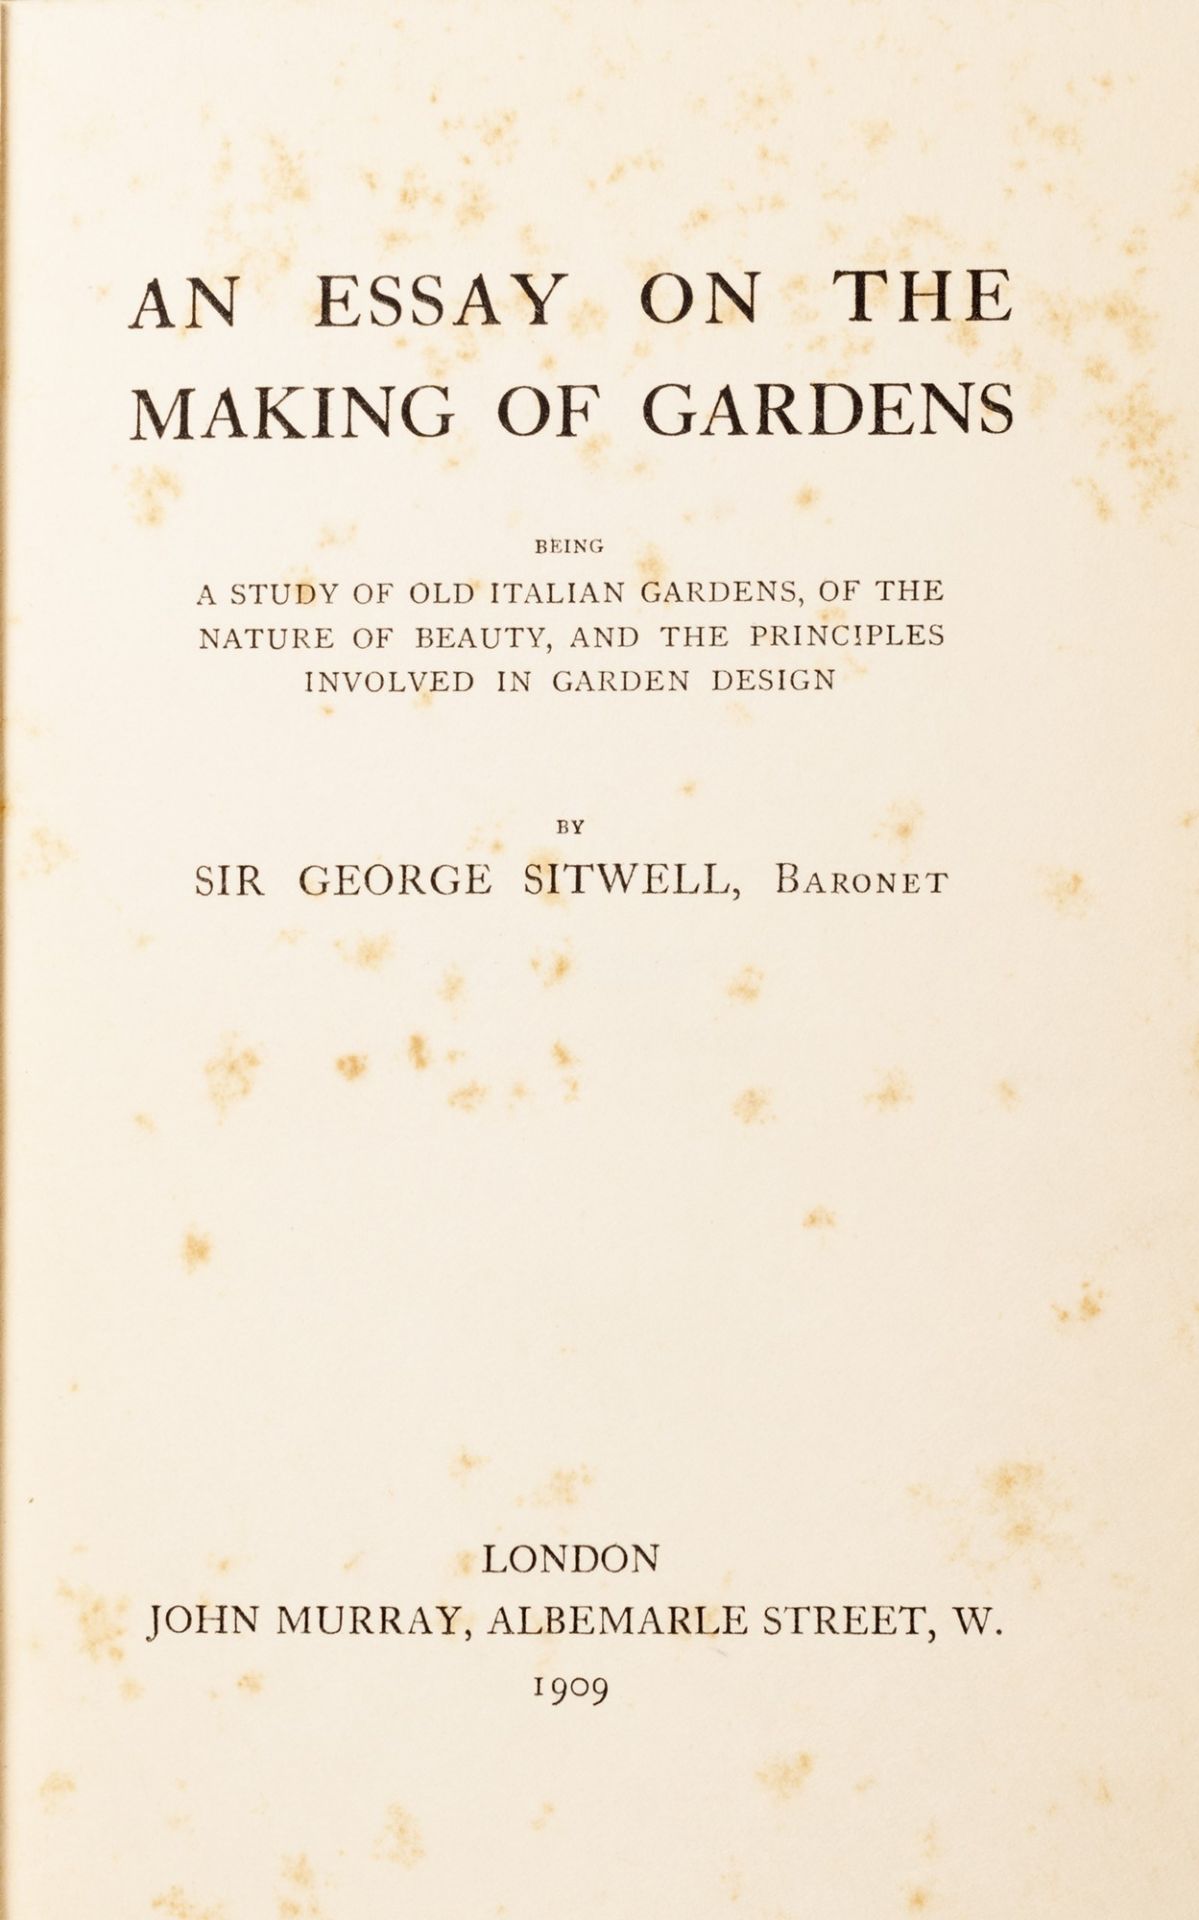 Giardini - Sitwell, George - An essay on the making of gardens being a study of old italian gardens, - Image 2 of 2